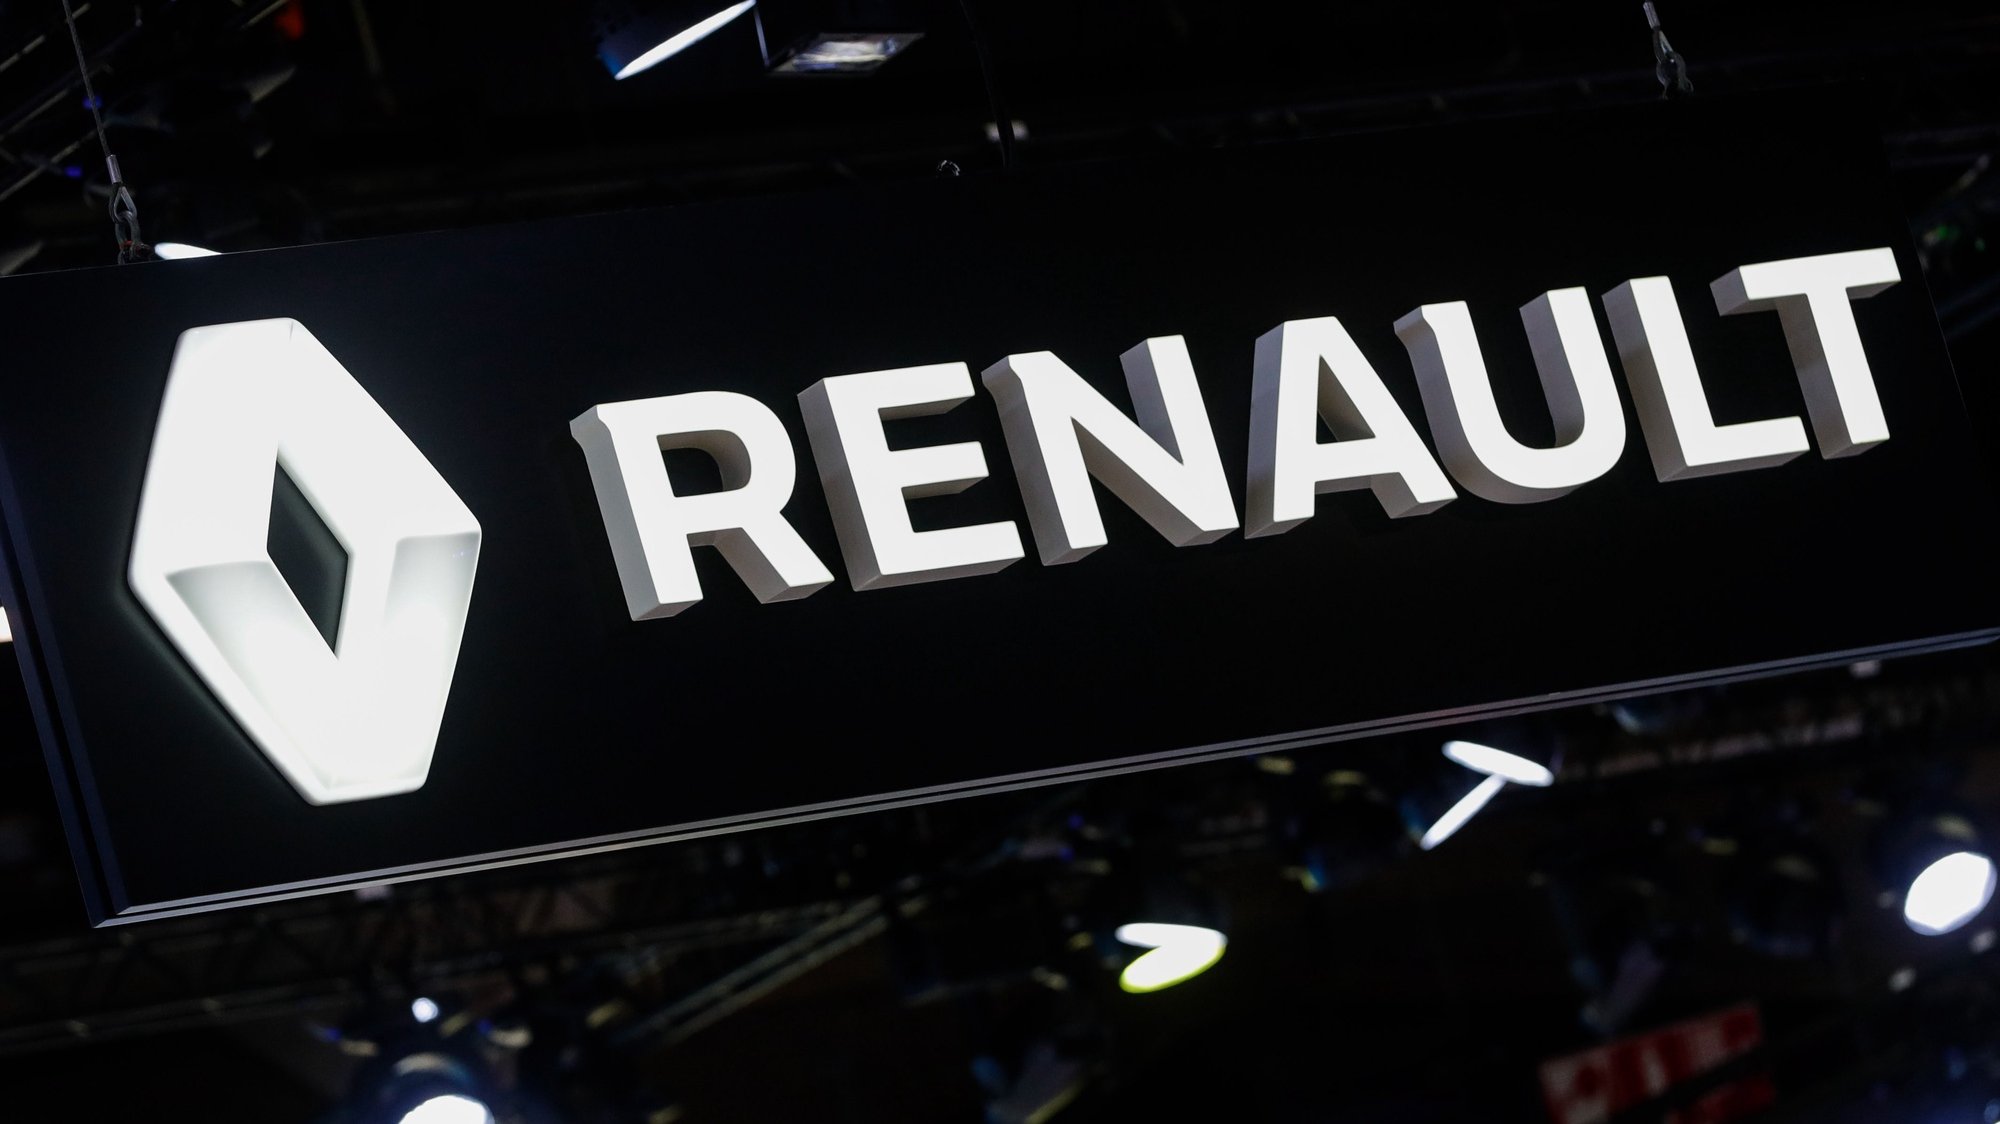 epa08451346 (FILE) - A view of Renault logo at the Renault stand during the inauguration of the Brussels Motor Show in Brussels, Belgium, 09 January 2020 (reissued 29 May 2020). French carmaker Renault on 29 May announced up to 15,000 layoffs worldwide after the coronavirus pandemic accentuated the drop in demand.  EPA/STEPHANIE LECOCQ